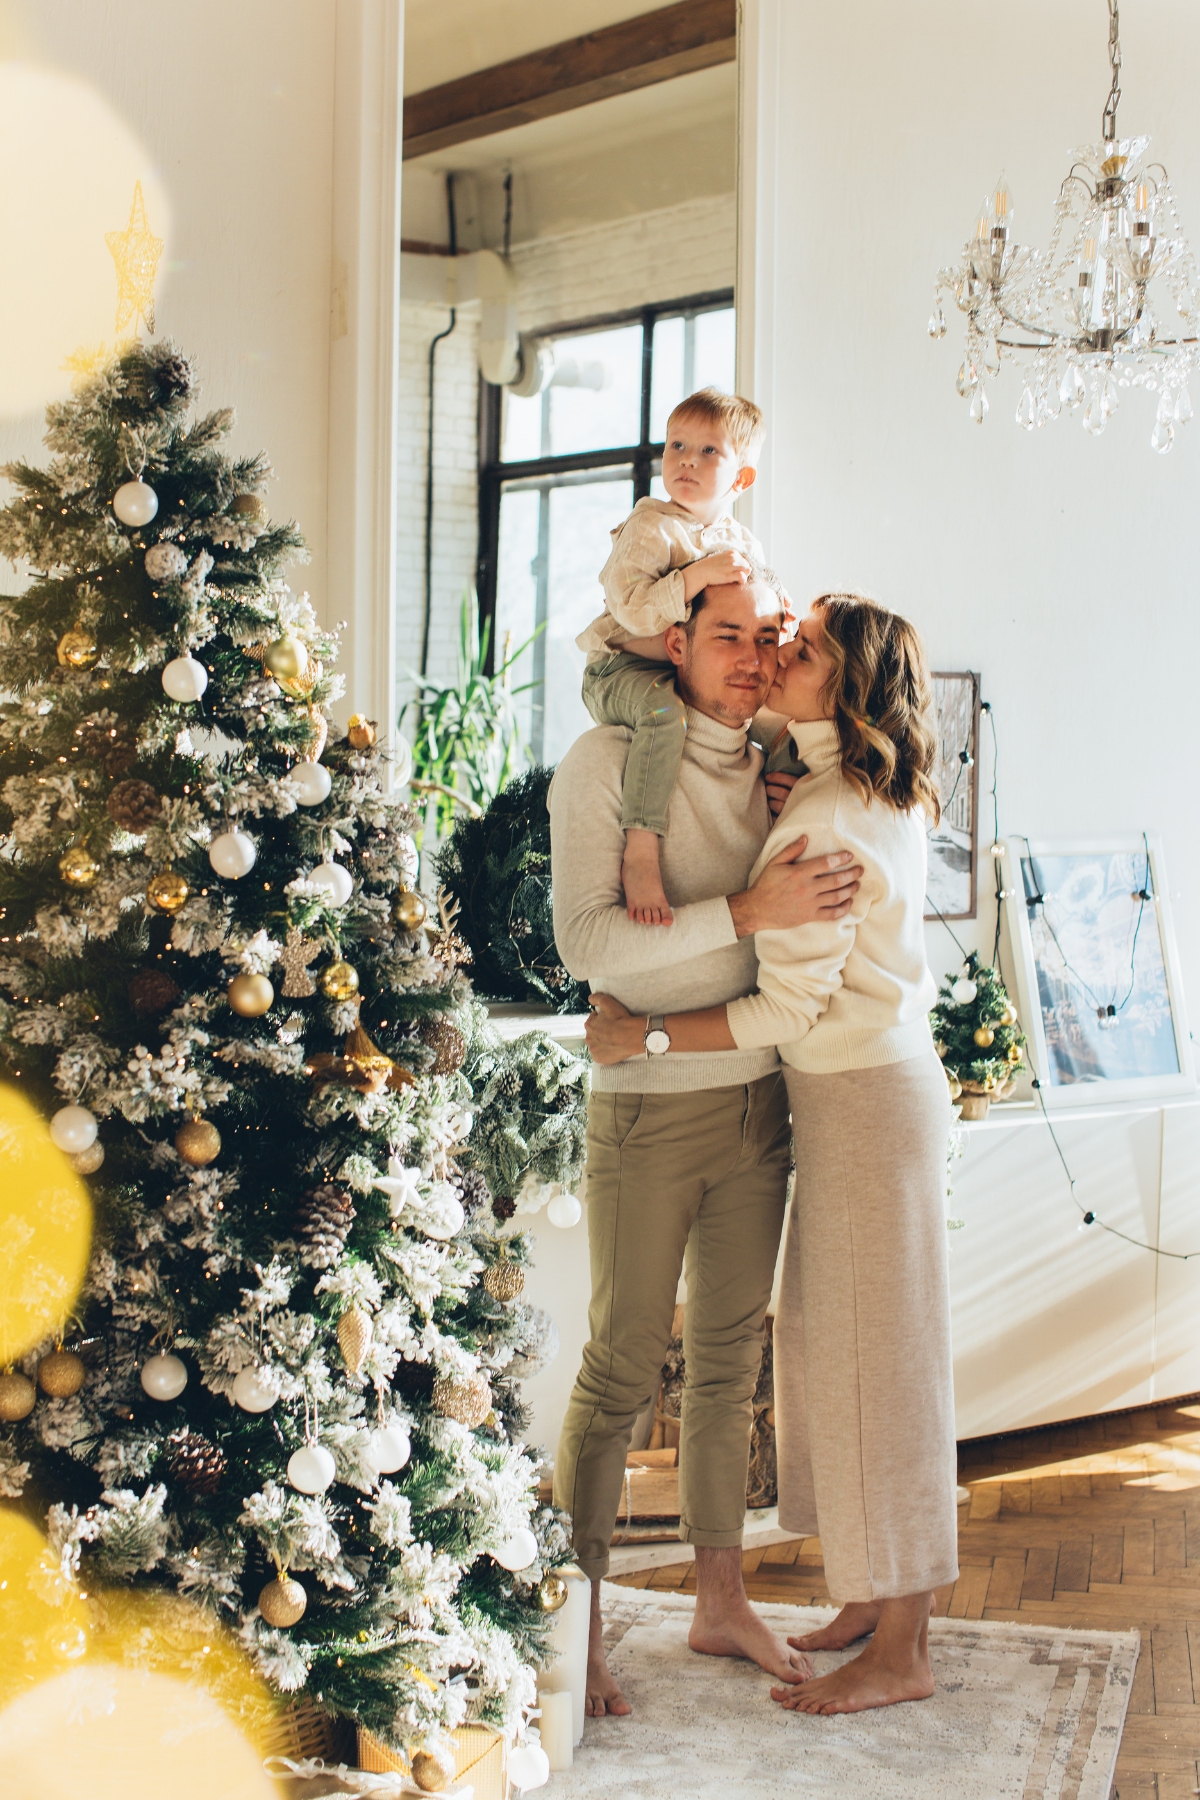 Make every Christmas memorable with our inspiring Christmas Traditions To Start With Your Family. Find the perfect blend of fun, warmth, and festive spirit with activities that will become your family's most cherished holiday rituals.